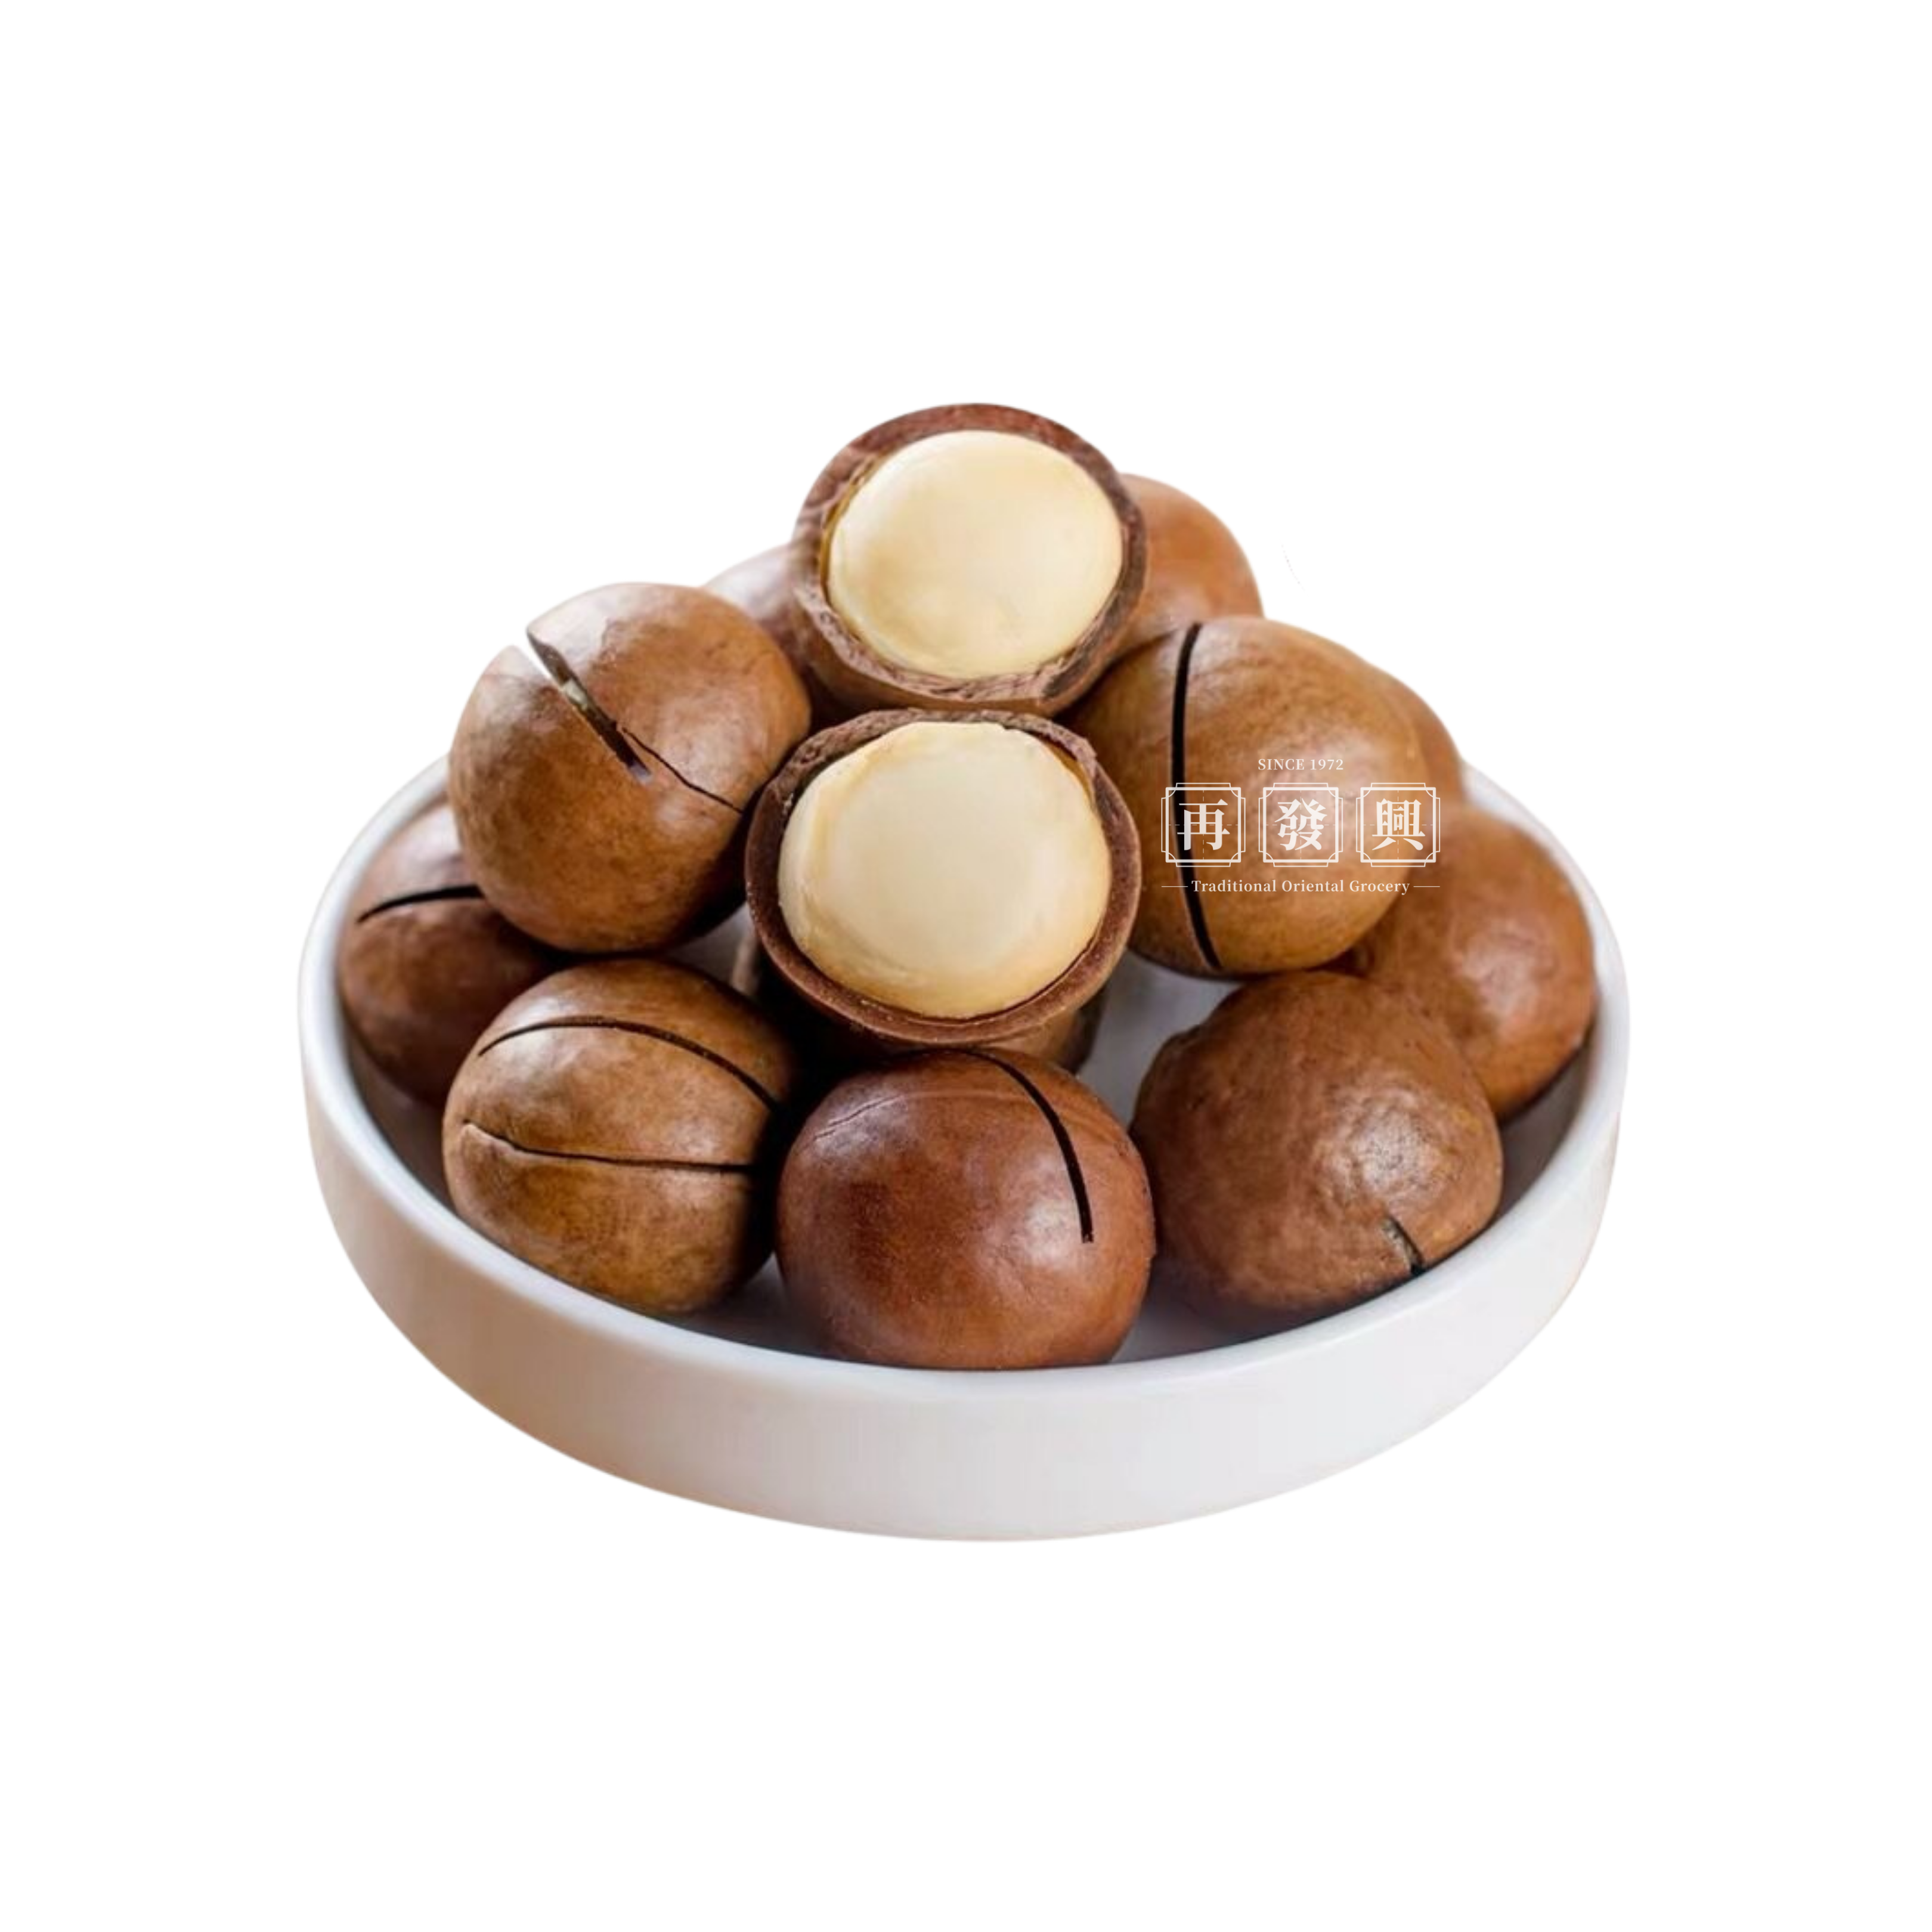 Roasted Macadamia Nut in Shell 500g